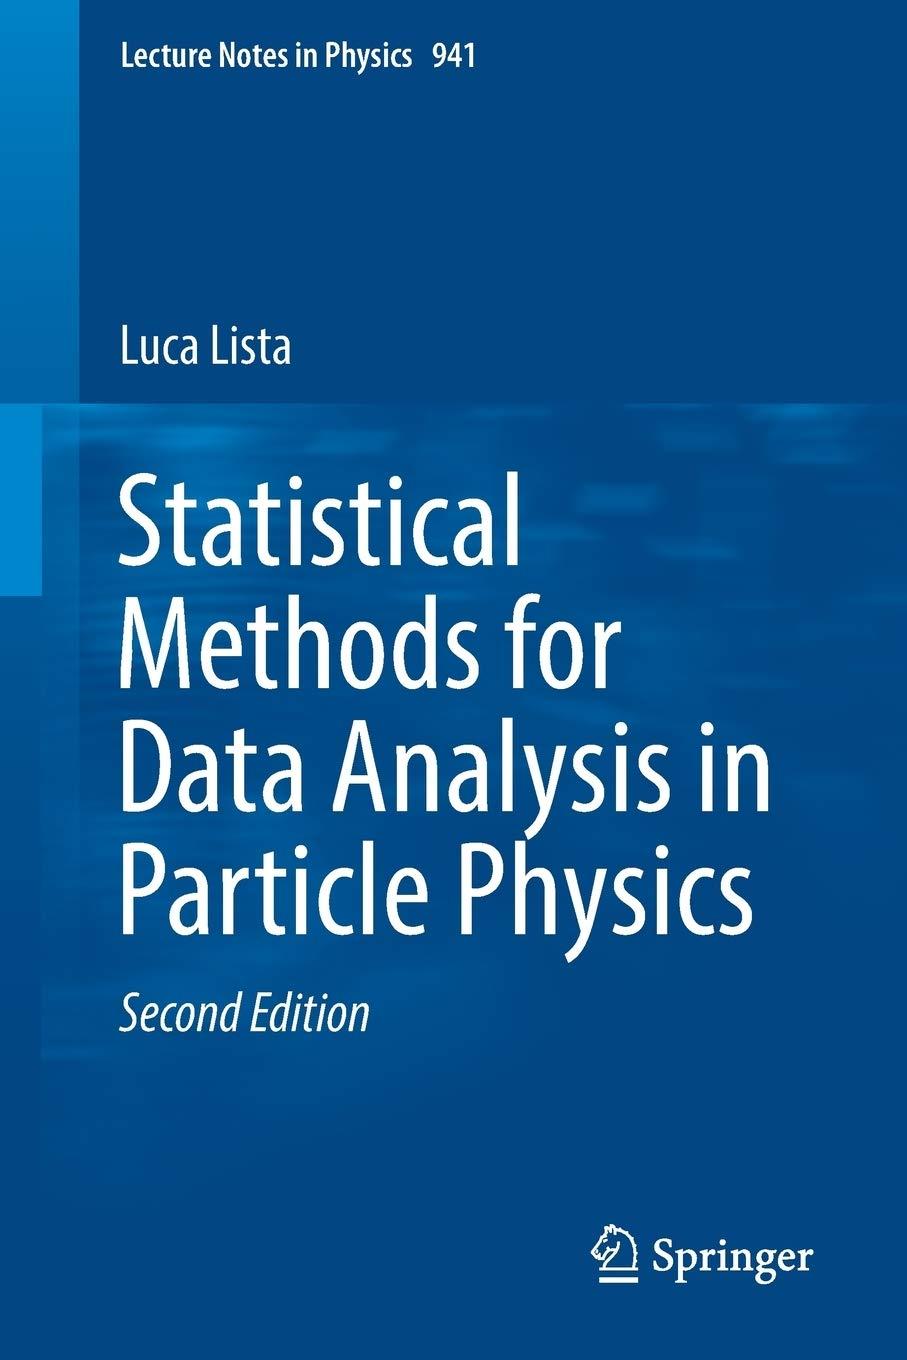 statistical methods for data analysis in particle physics 2nd edition luca lista 3319628399, 978-3319628394